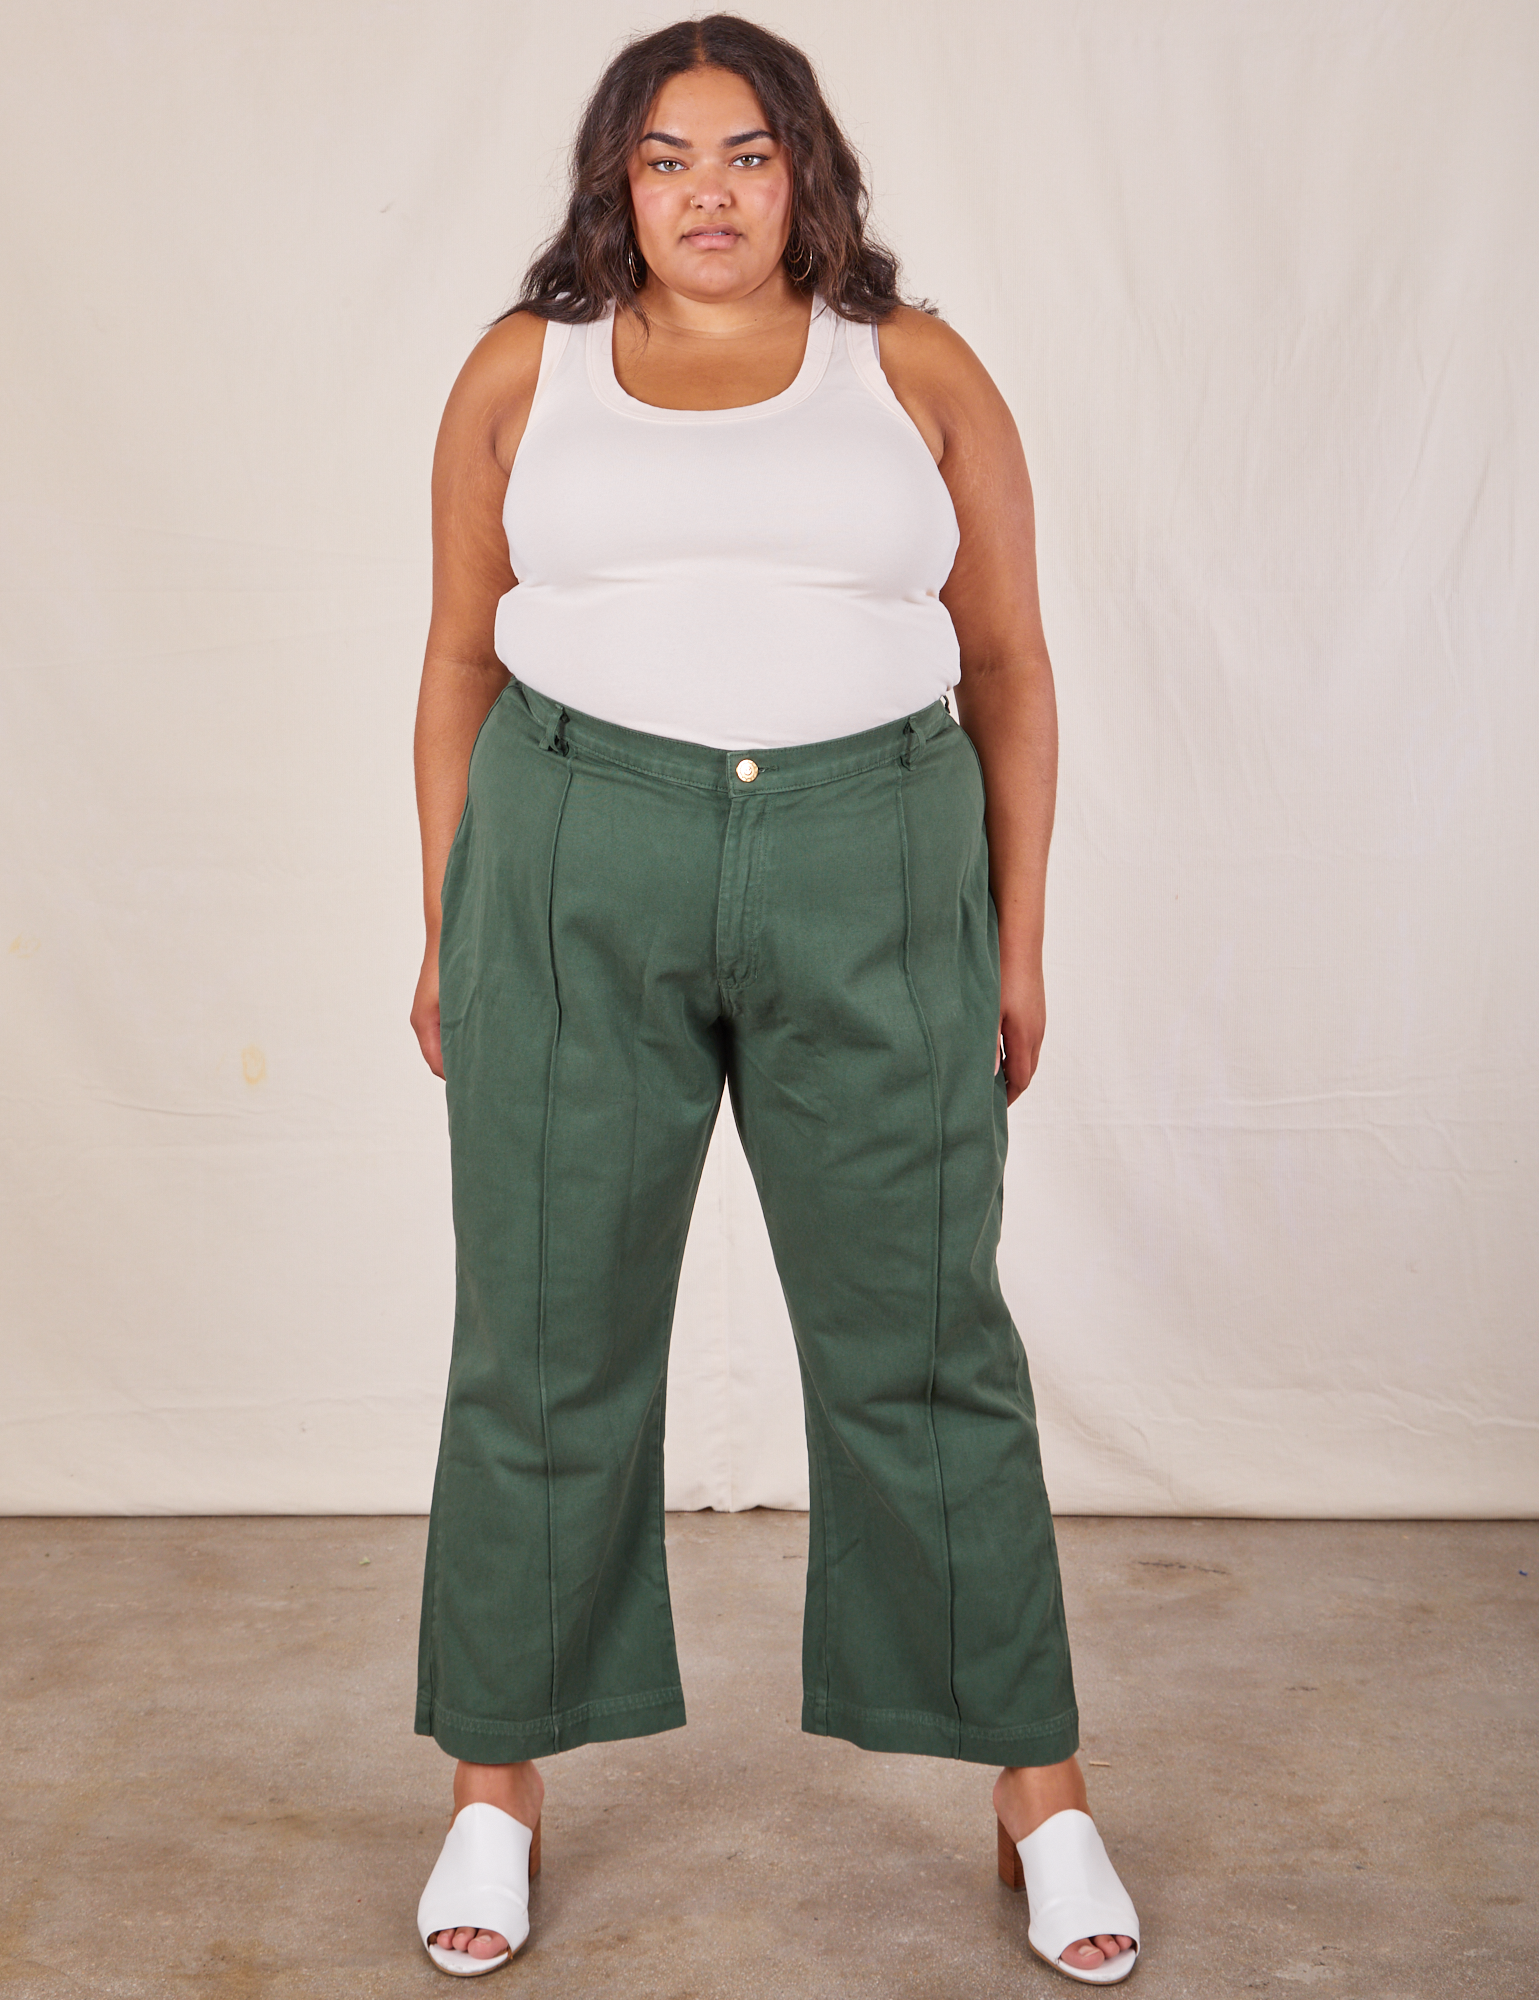 Alicia is wearing Western Pants in Dark Green Emerald and vintage off-white Tank Top